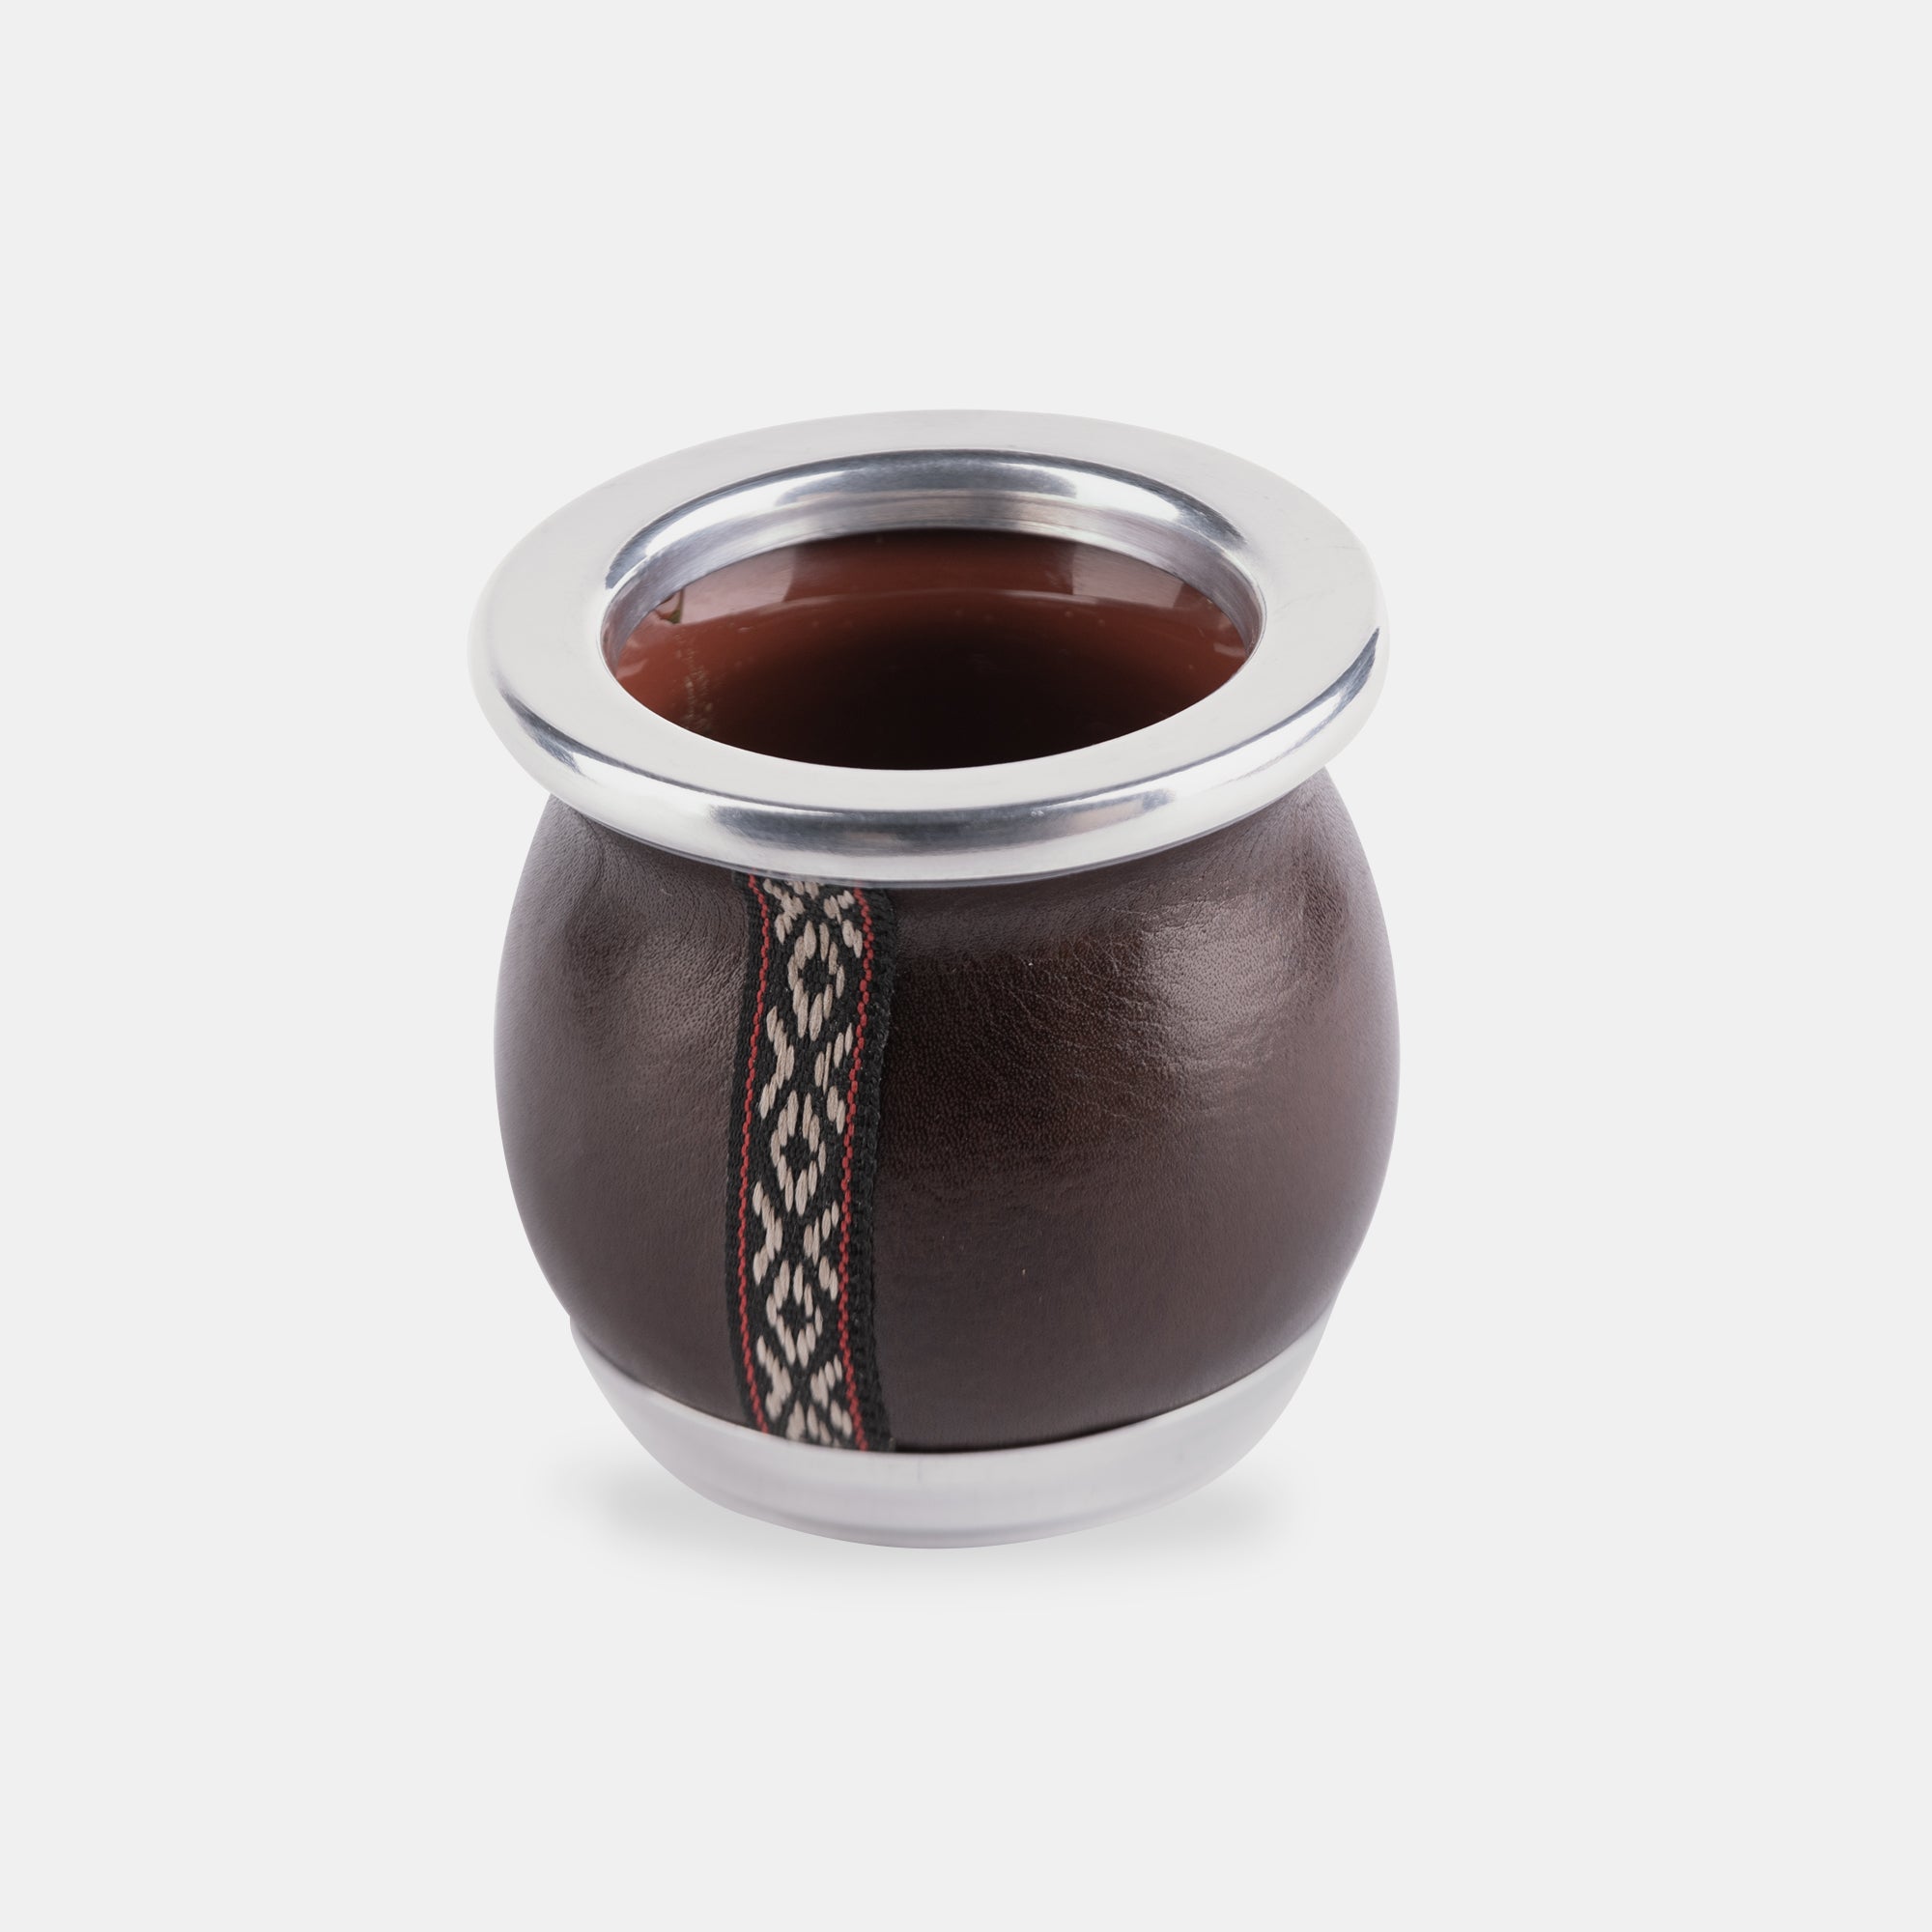 Ceramic Mate Cup Bound in Leather to Drink Yerba Mate UruShop